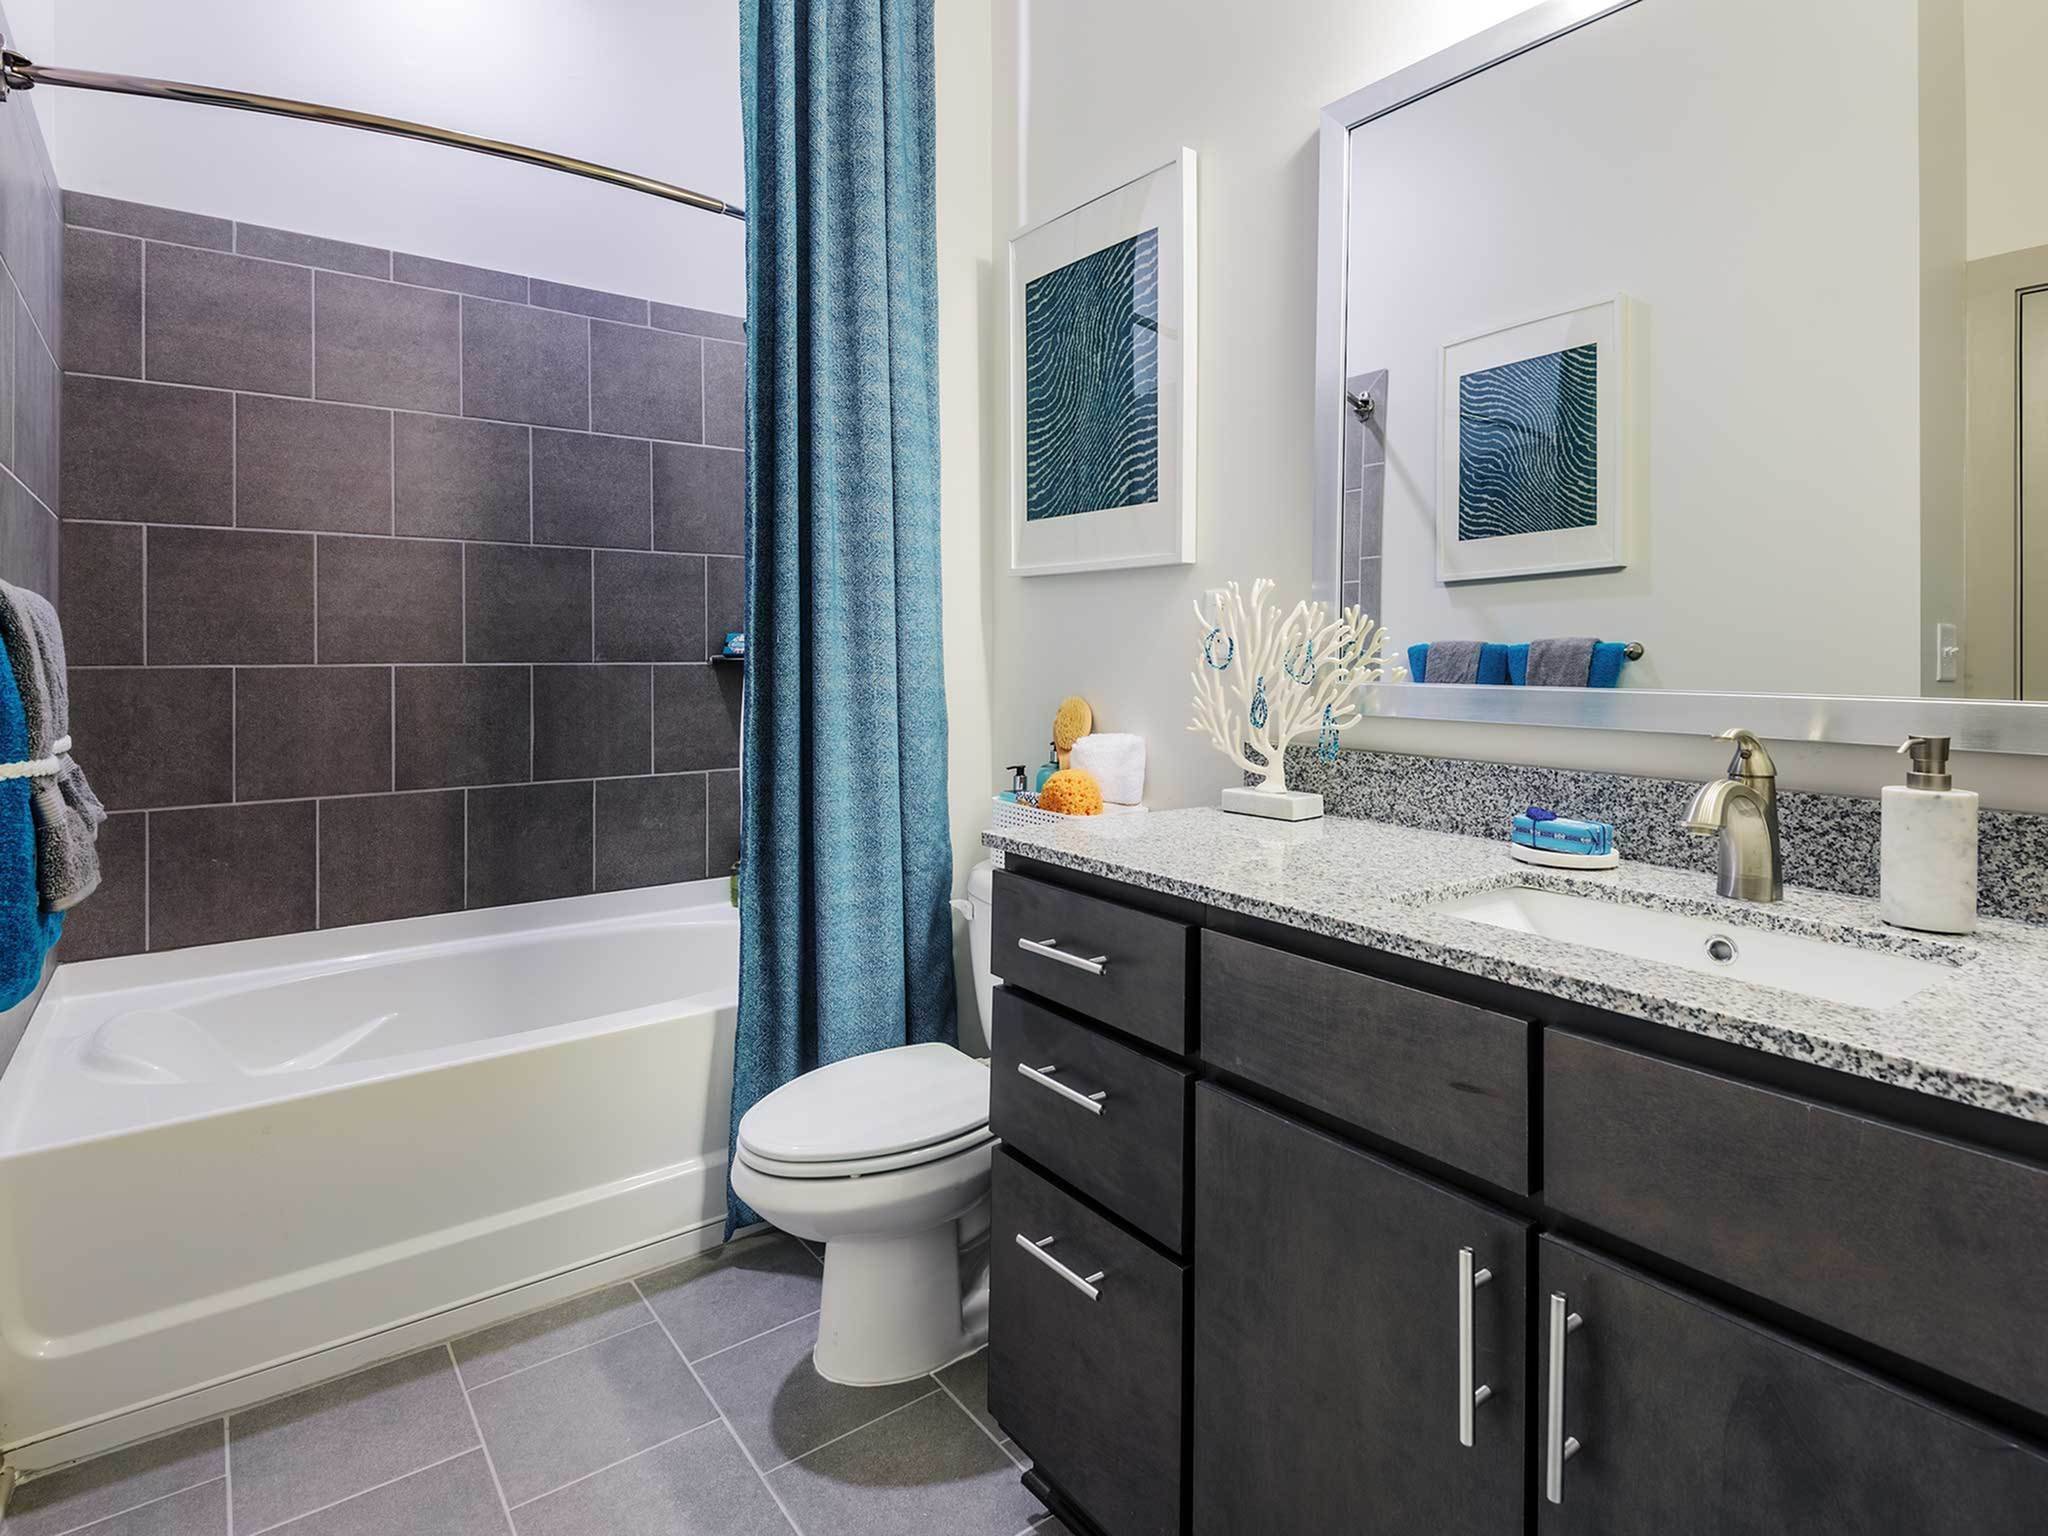 Renovated bathroom with granite countertops and blue accents.